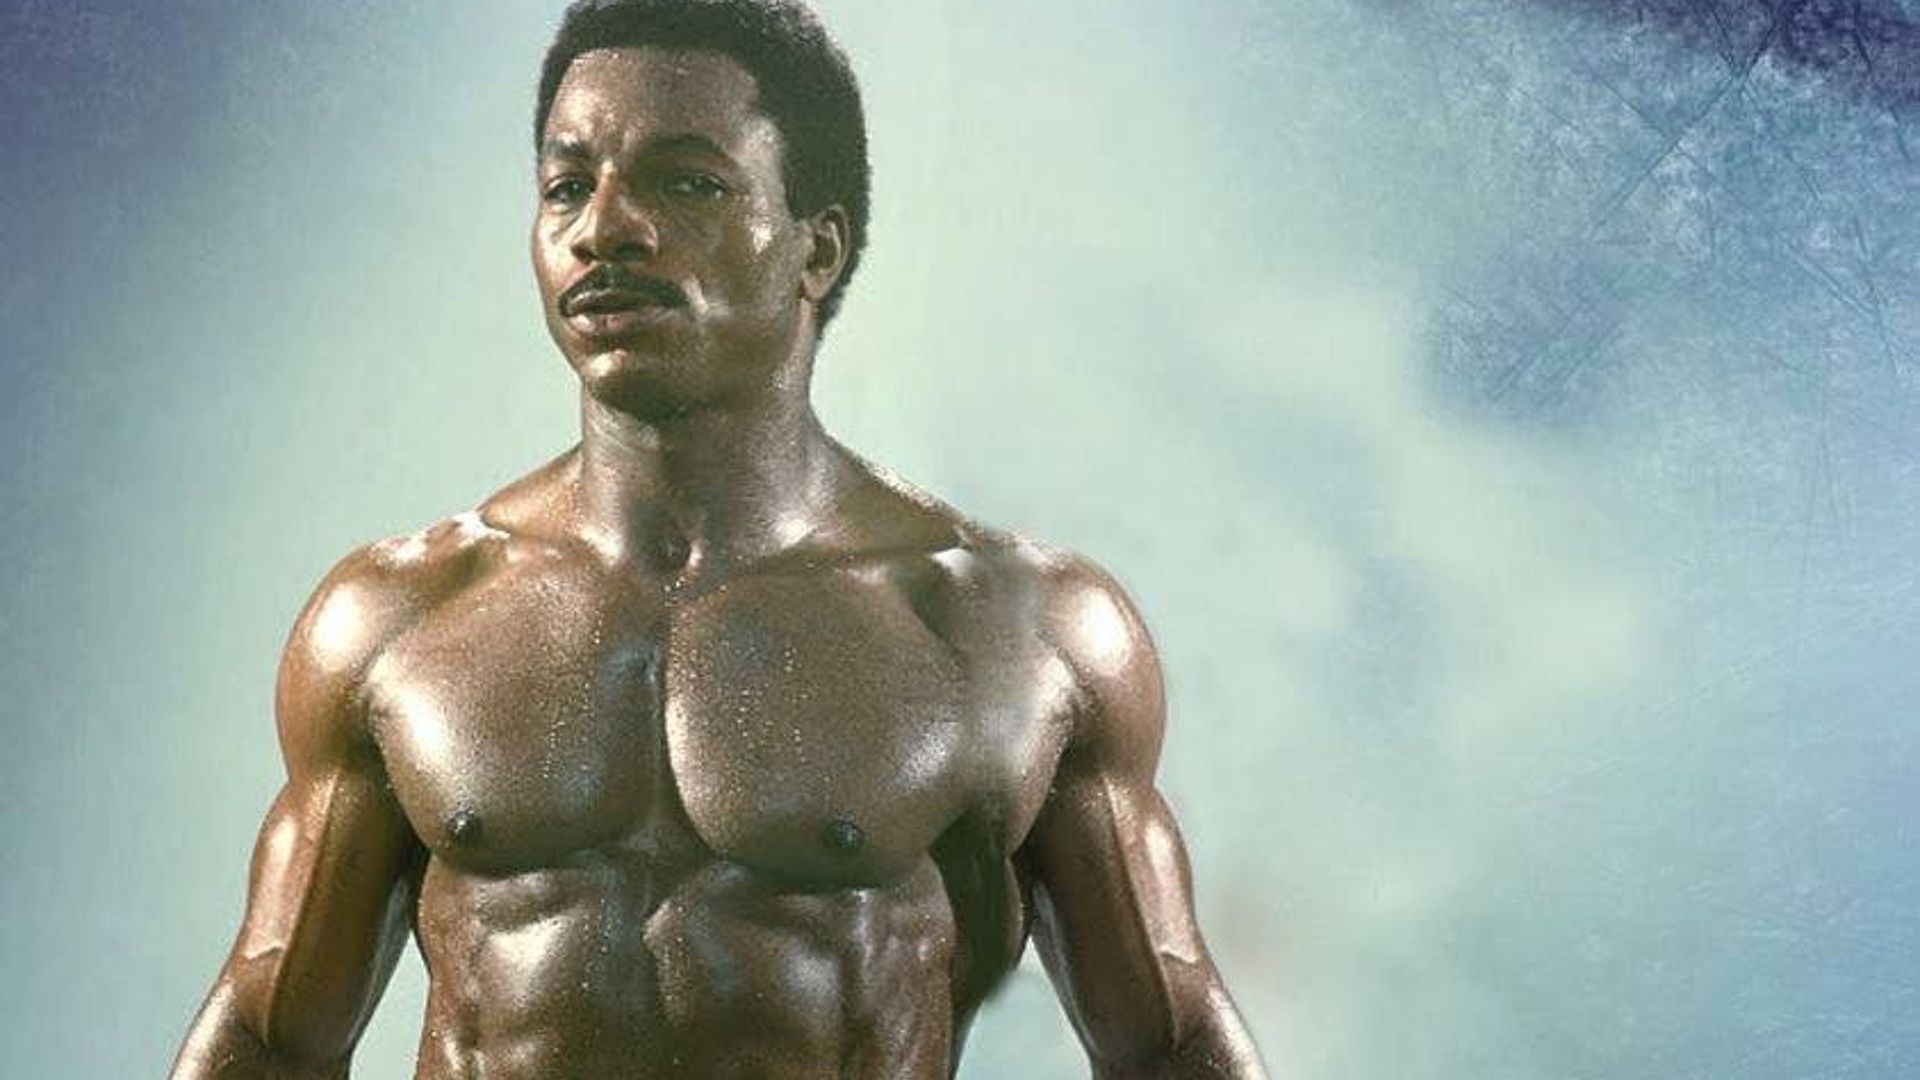 Carl Weathers, Apollo Creed From Rocky movies, Dead At 76